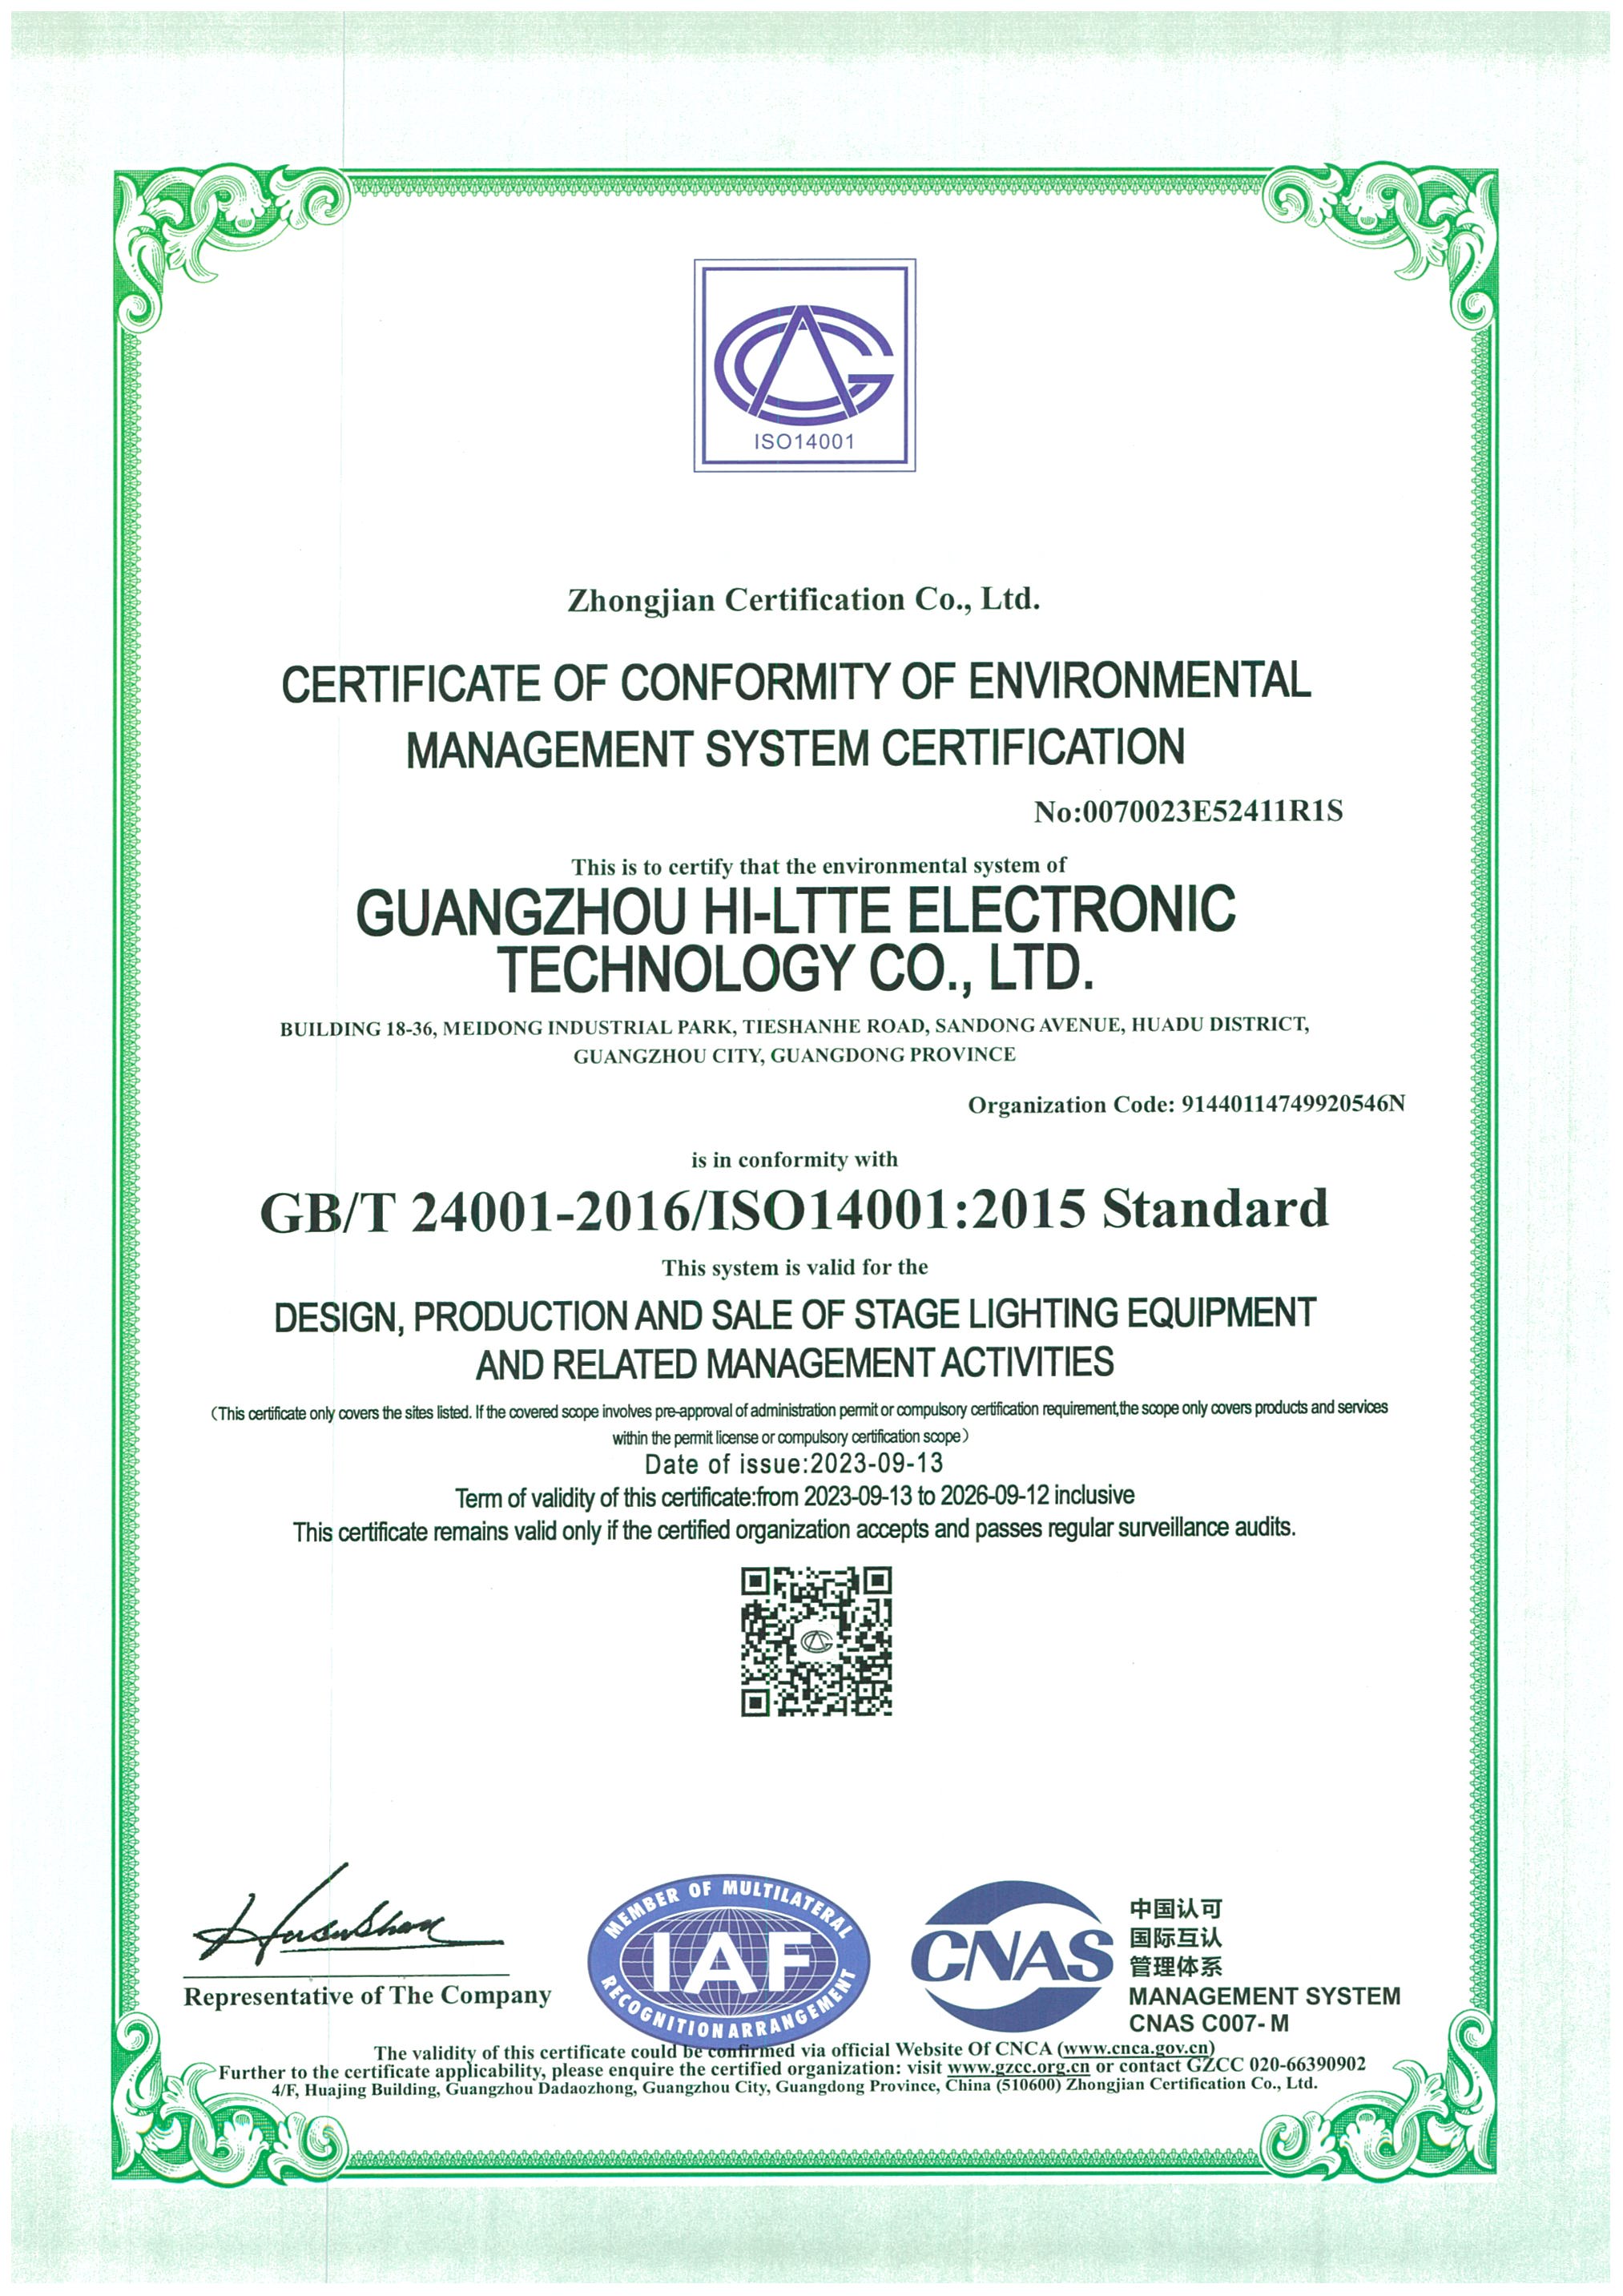 CERTIFICATE OF CONFORMITY OF ENVIRONMENTAL MANAGEMENT SYSTEM CERTIFICATION